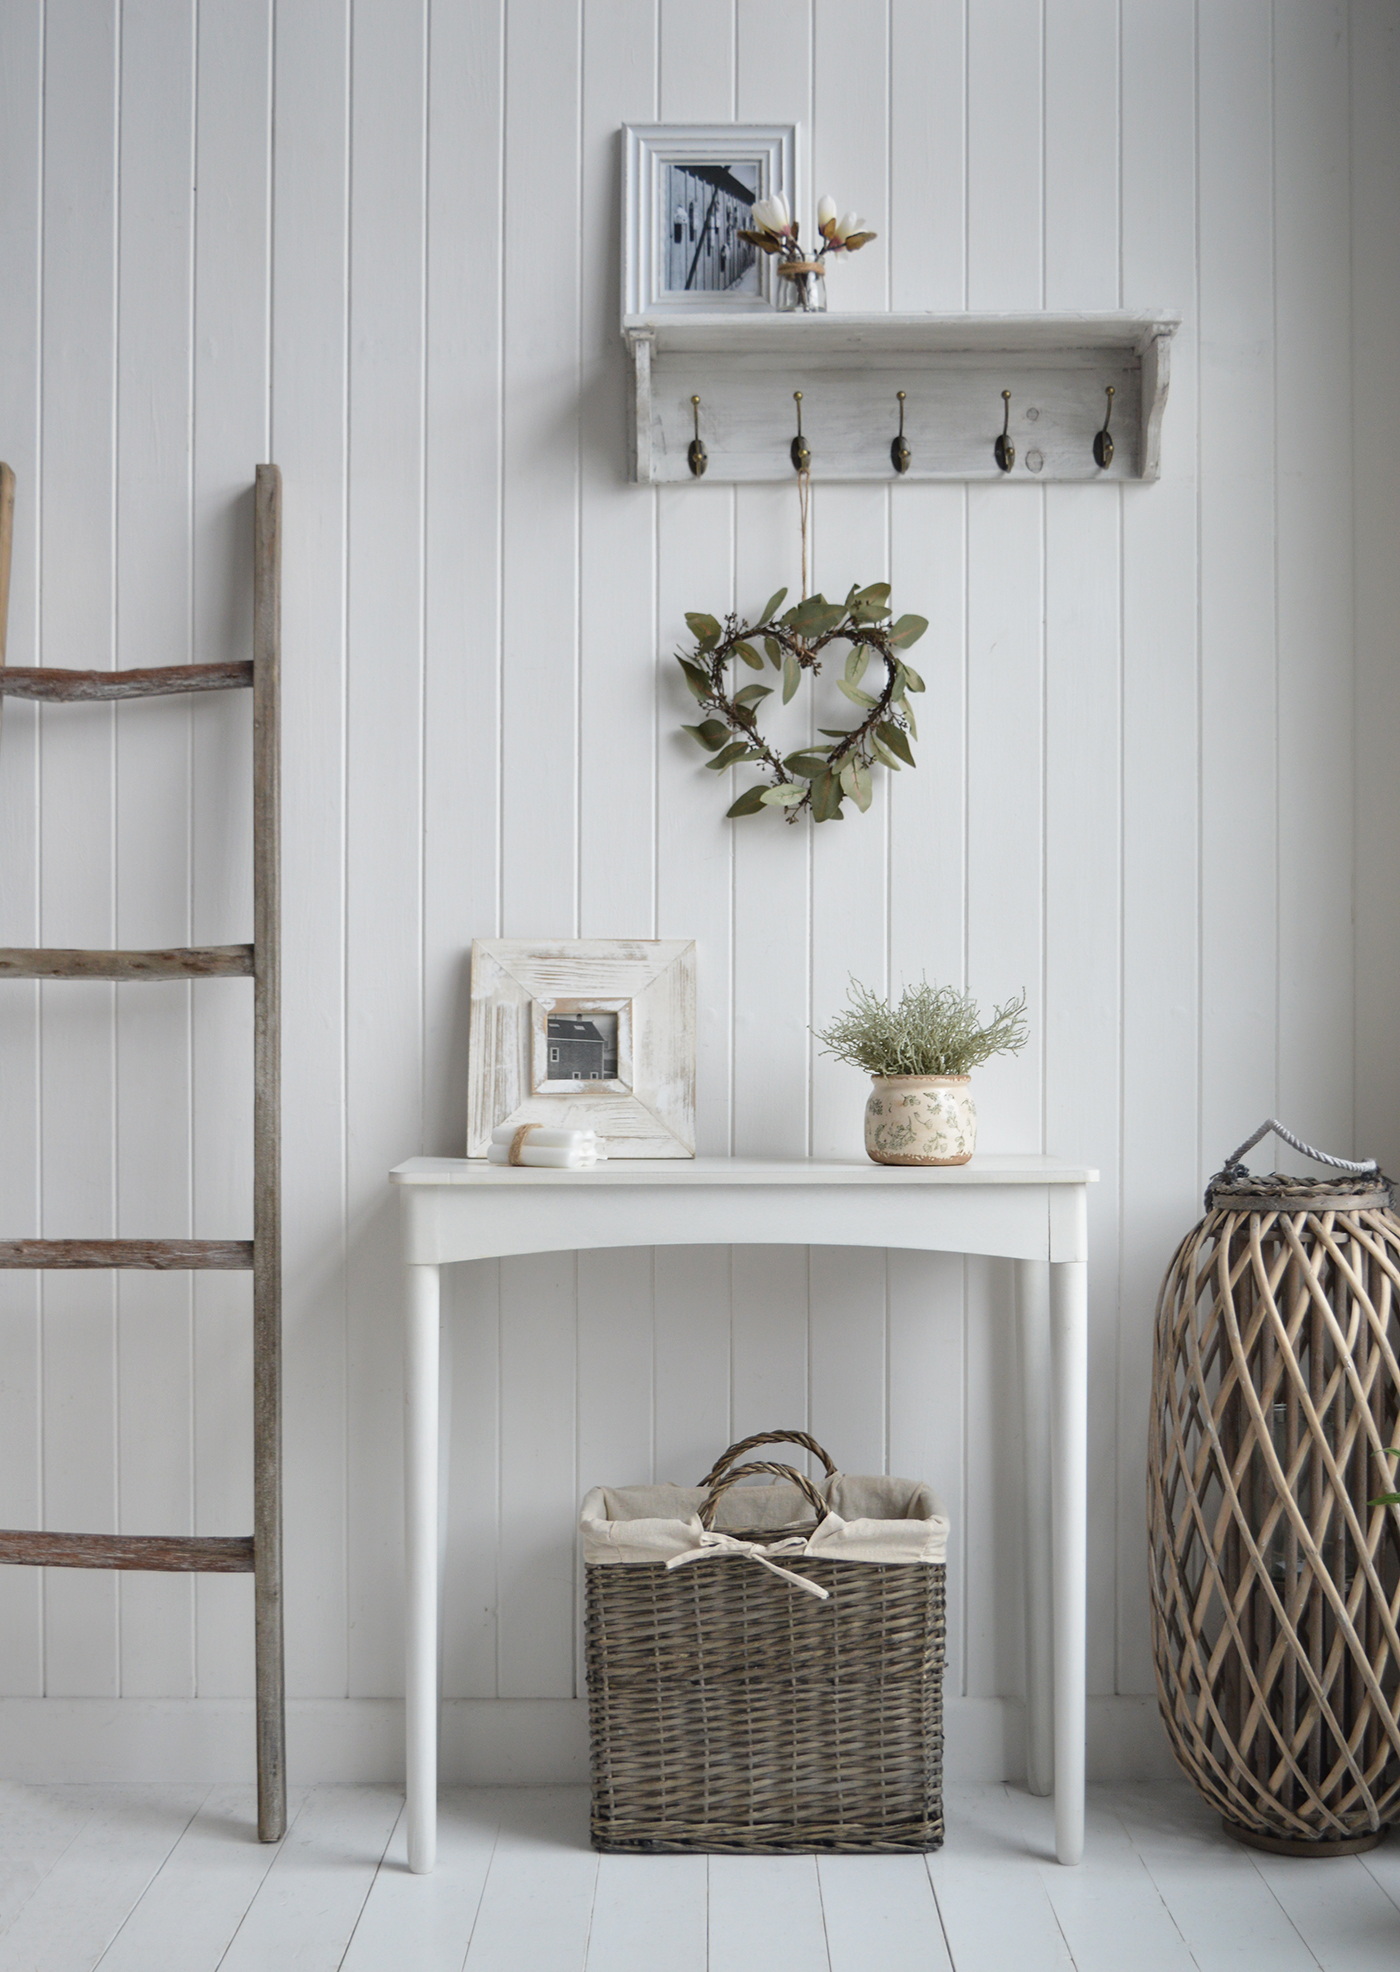 The Simple Cape Ann, shown here with the narrow Windsor basket tidy and contrasting tall willow lantern in a living room setting. Such a simply egeant piece for the hall or bedroom to style to suit your interior